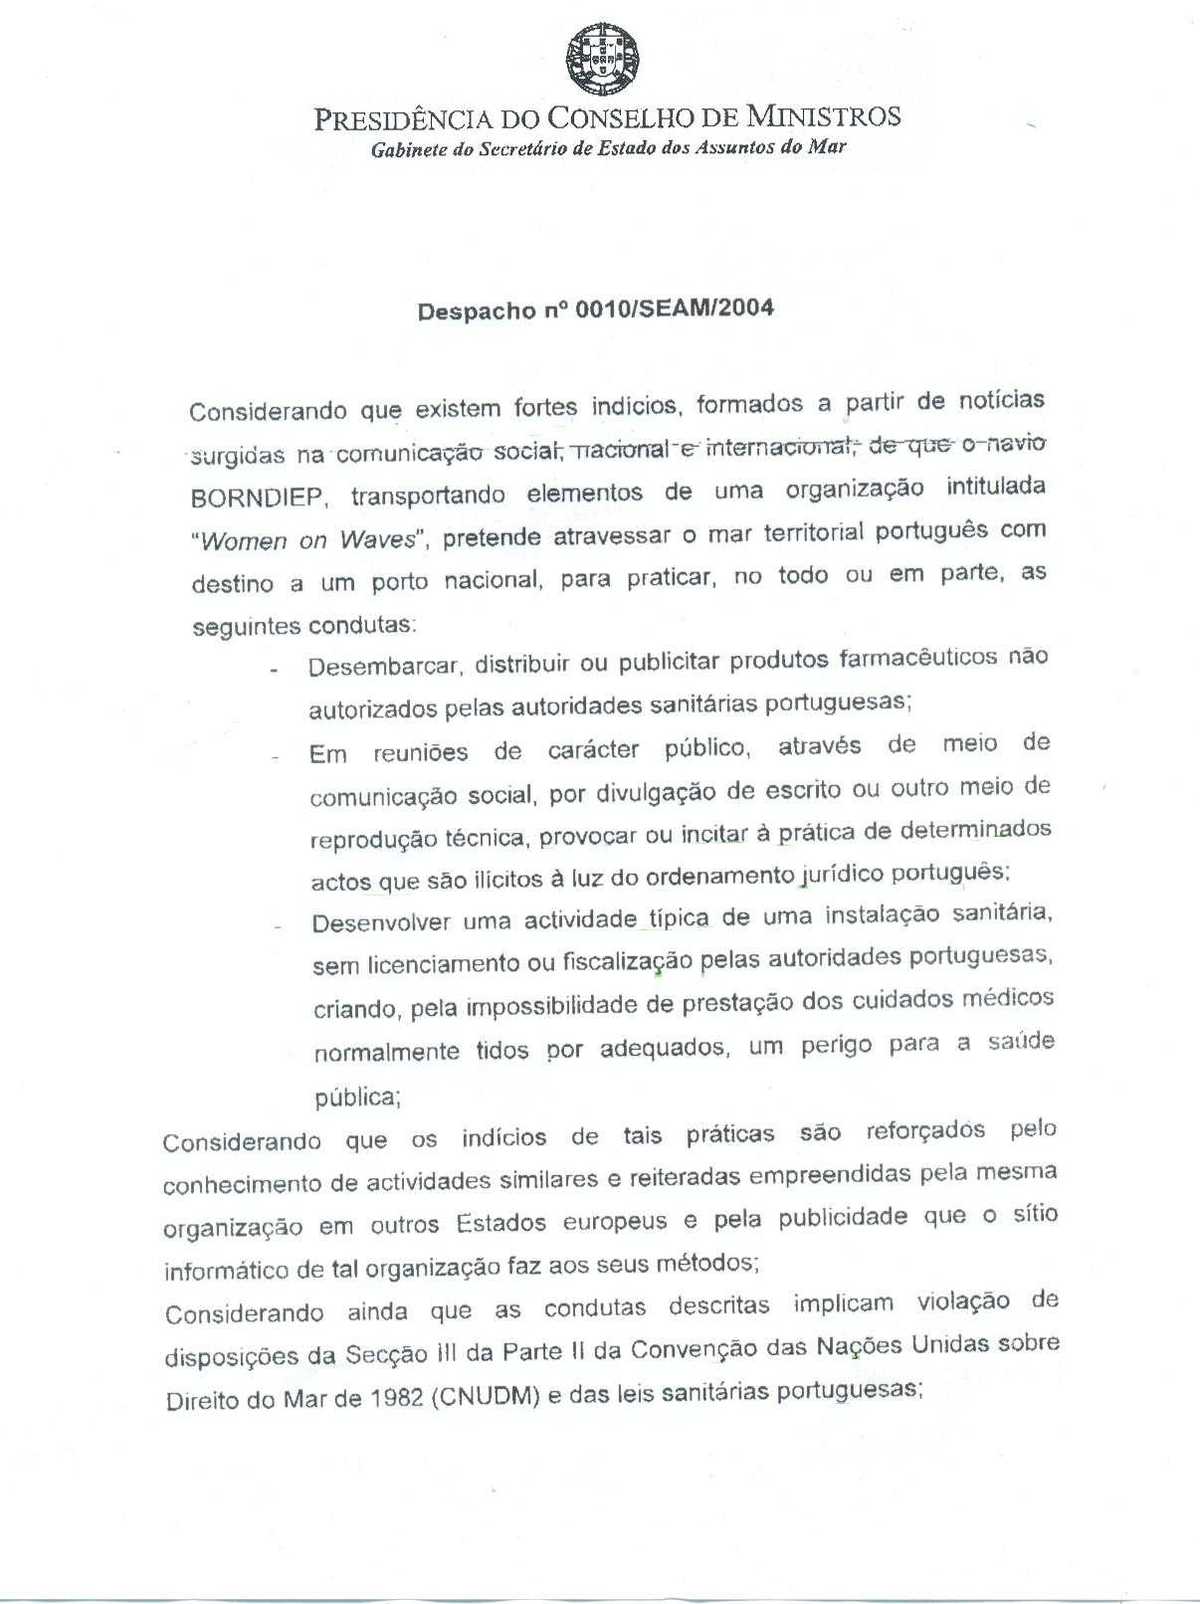 Statement nr. 0010/SEAM/2004 from the Presidency of the Council of Ministers of Portugal. page 1